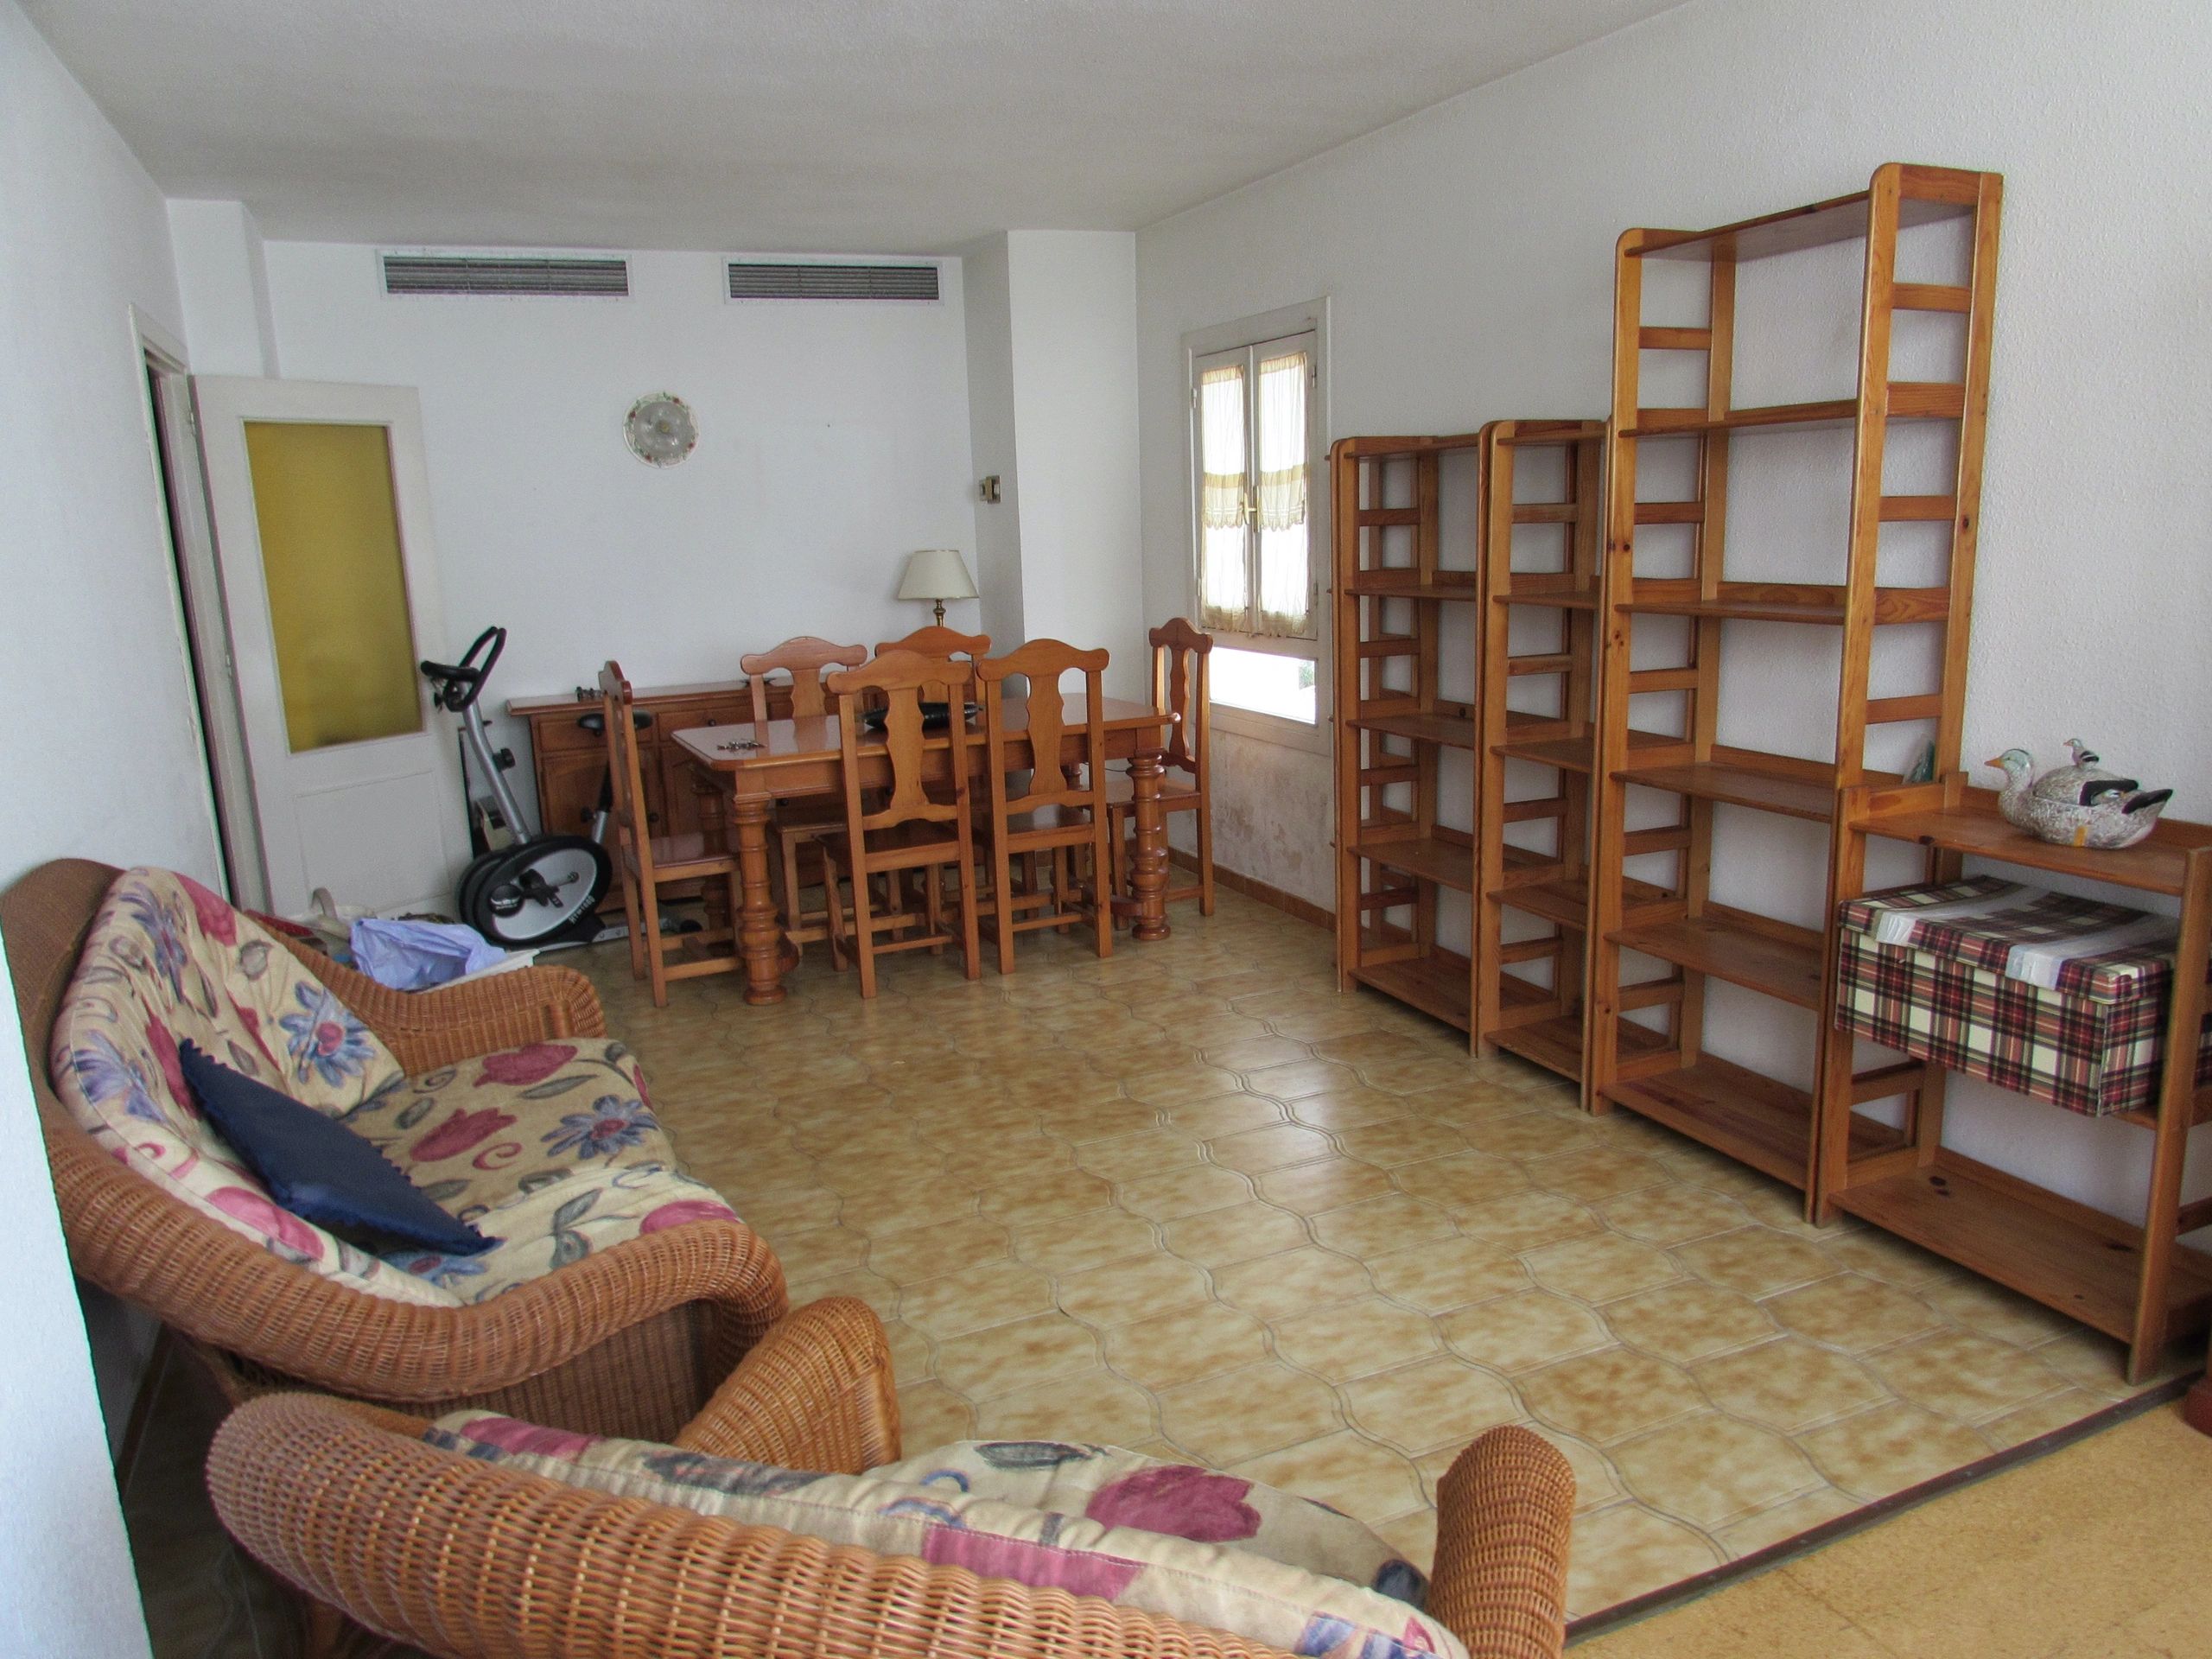 For sale 2 bedroom/2 bathroom apartment in the centre of Marbella with storage room, communal swimmi